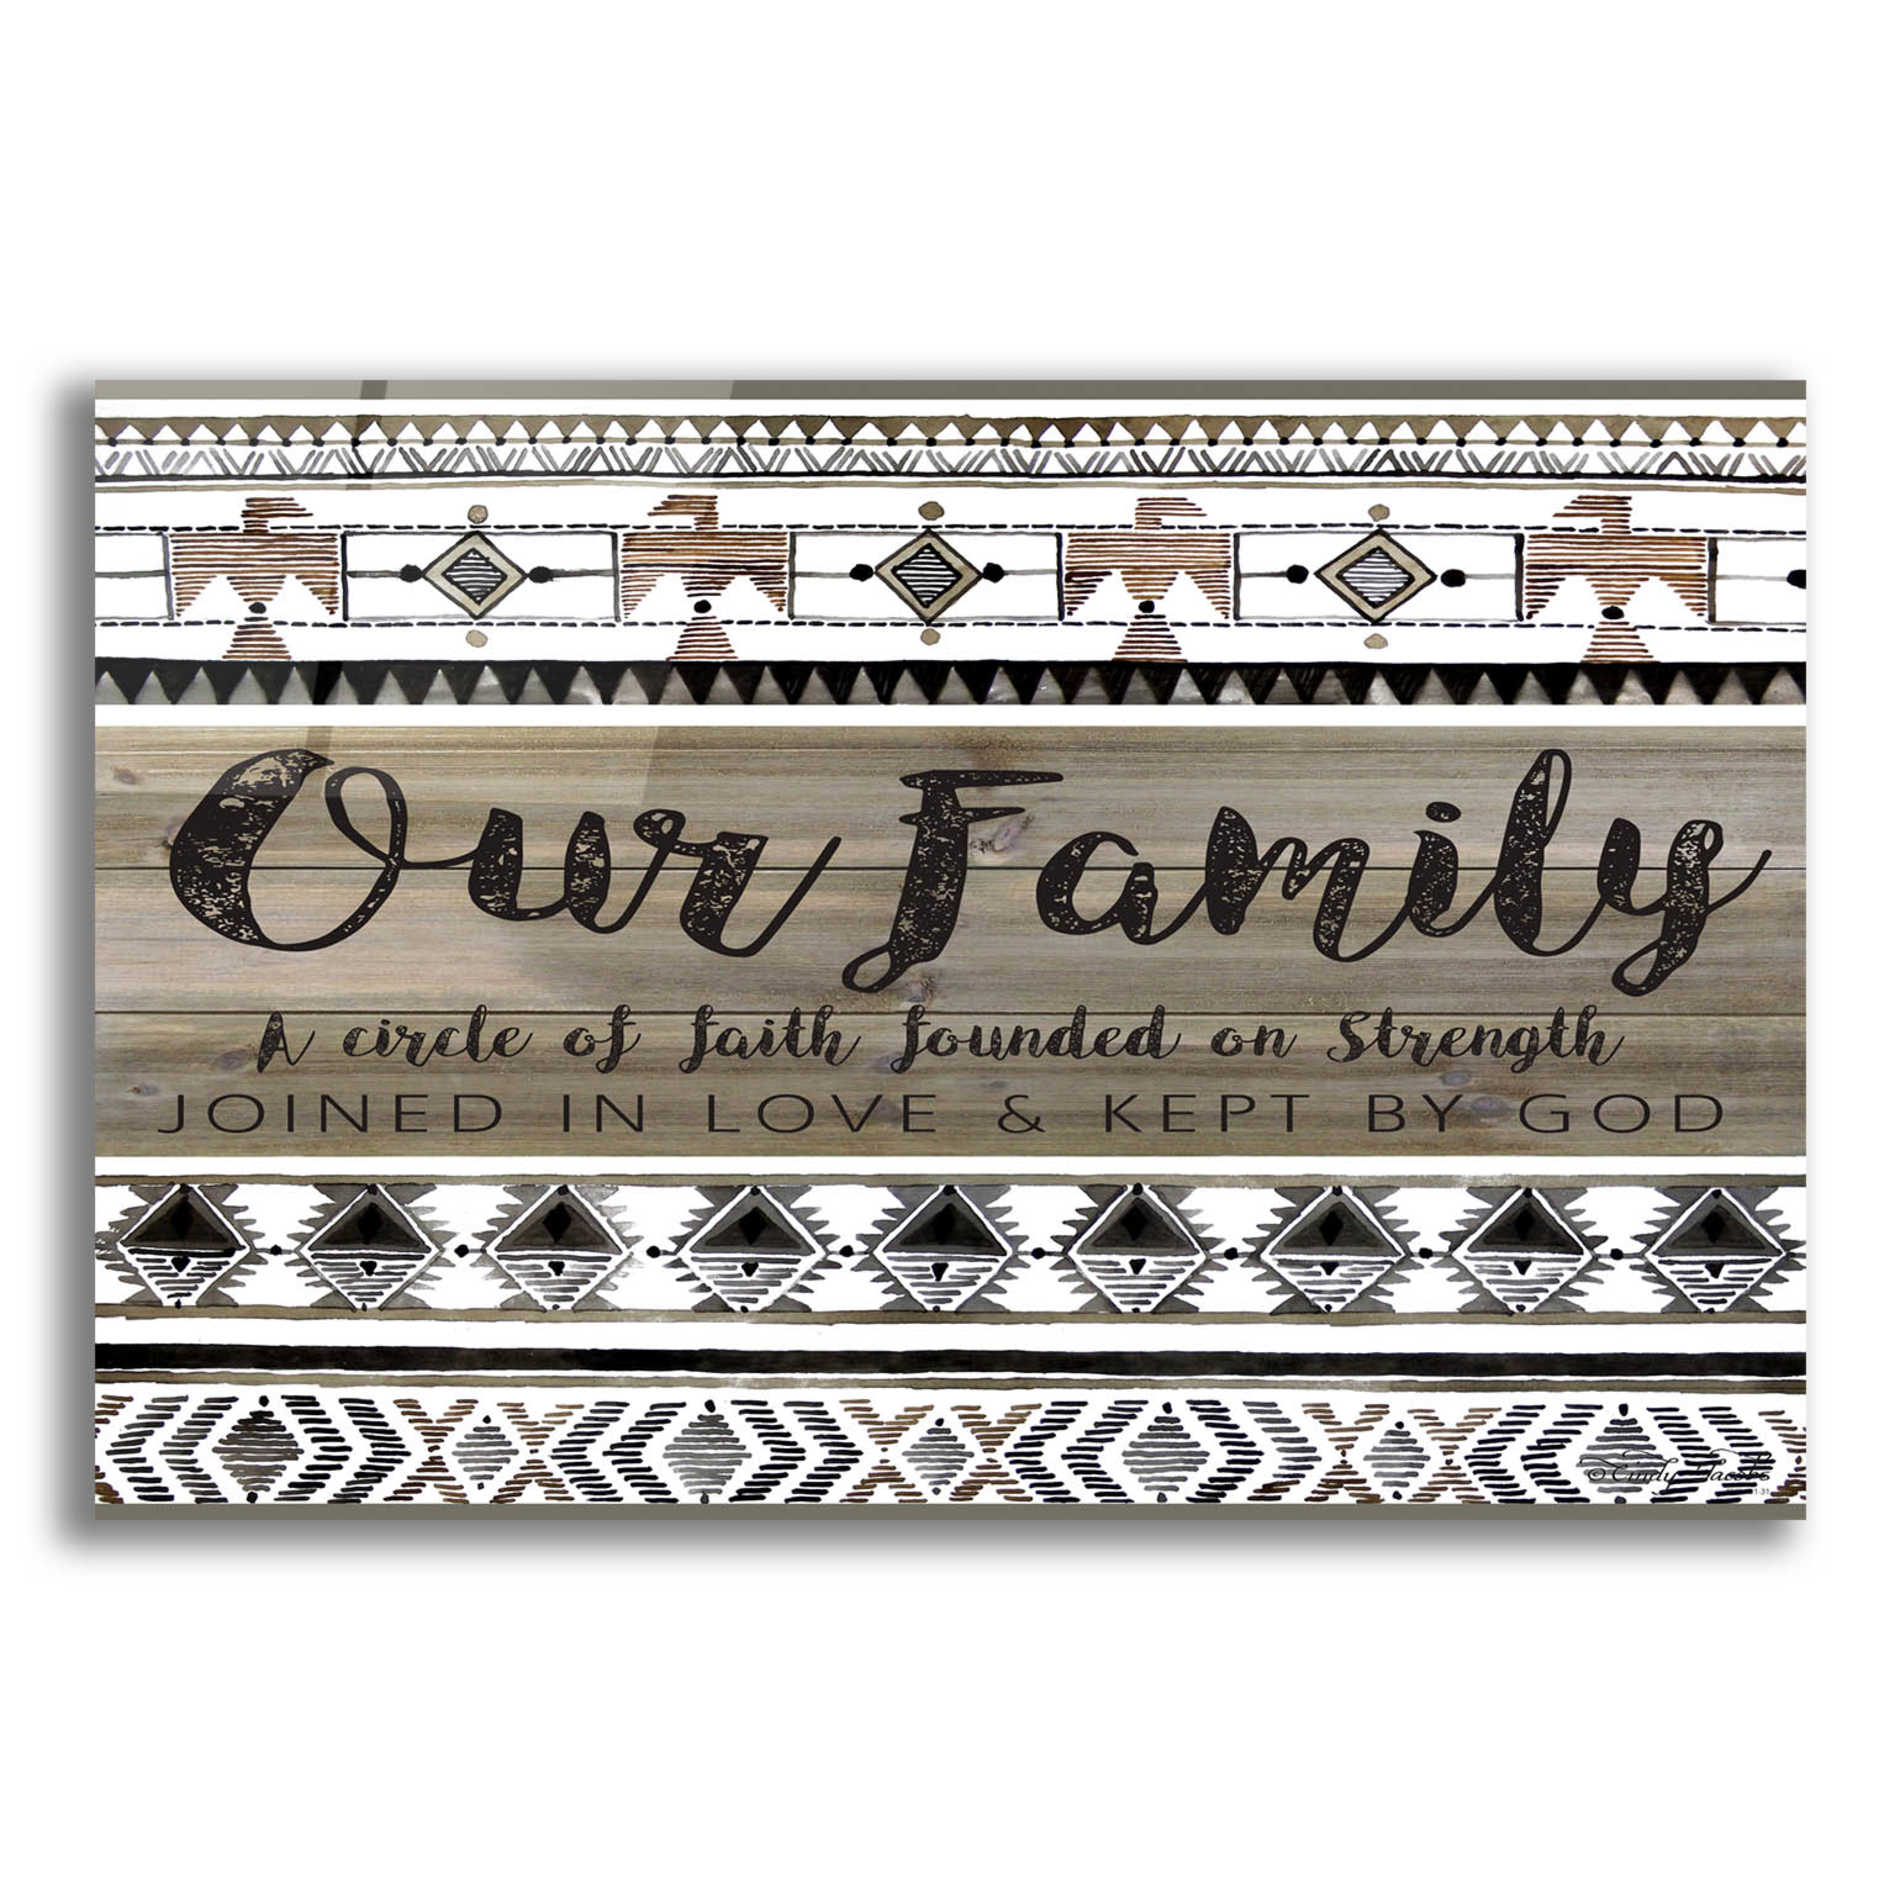 Epic Art 'Our Family' by Cindy Jacobs, Acrylic Glass Wall Art,16x12